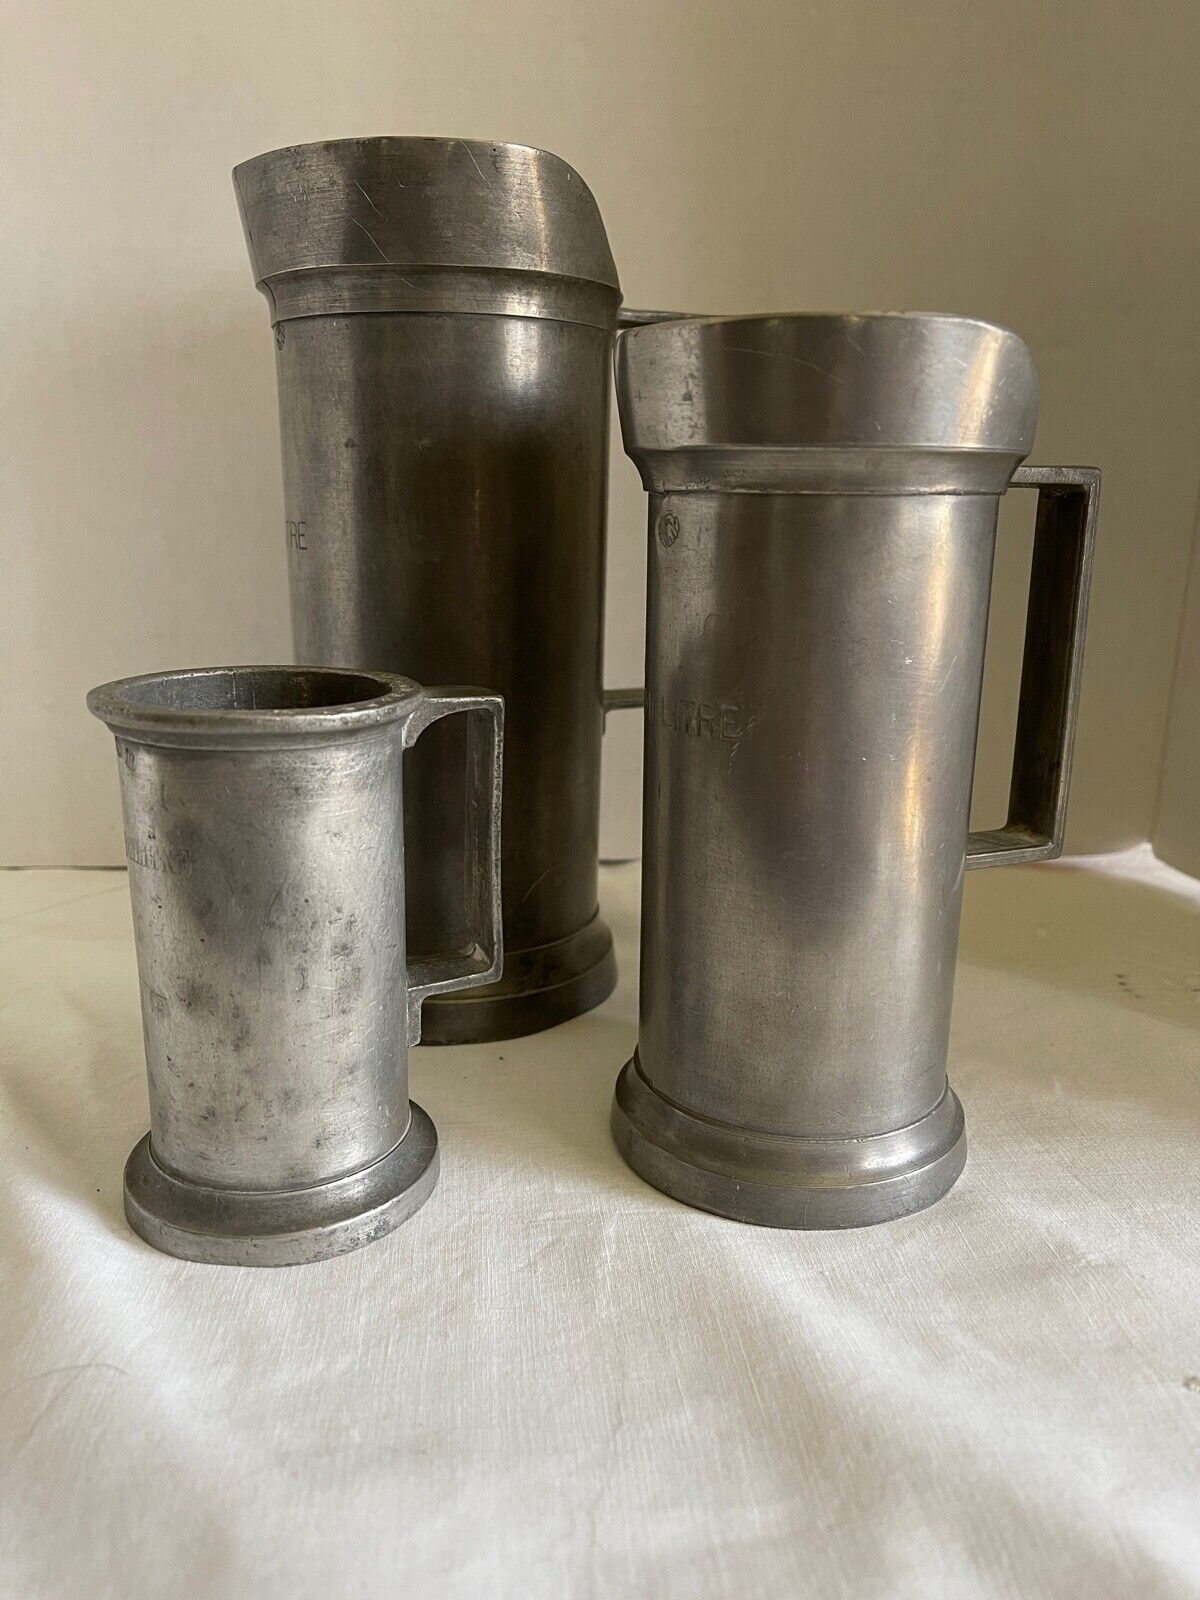 Antique Pewter Steins Toulouse France Liter, Demi Liter, Double Deciliter 1800\'s